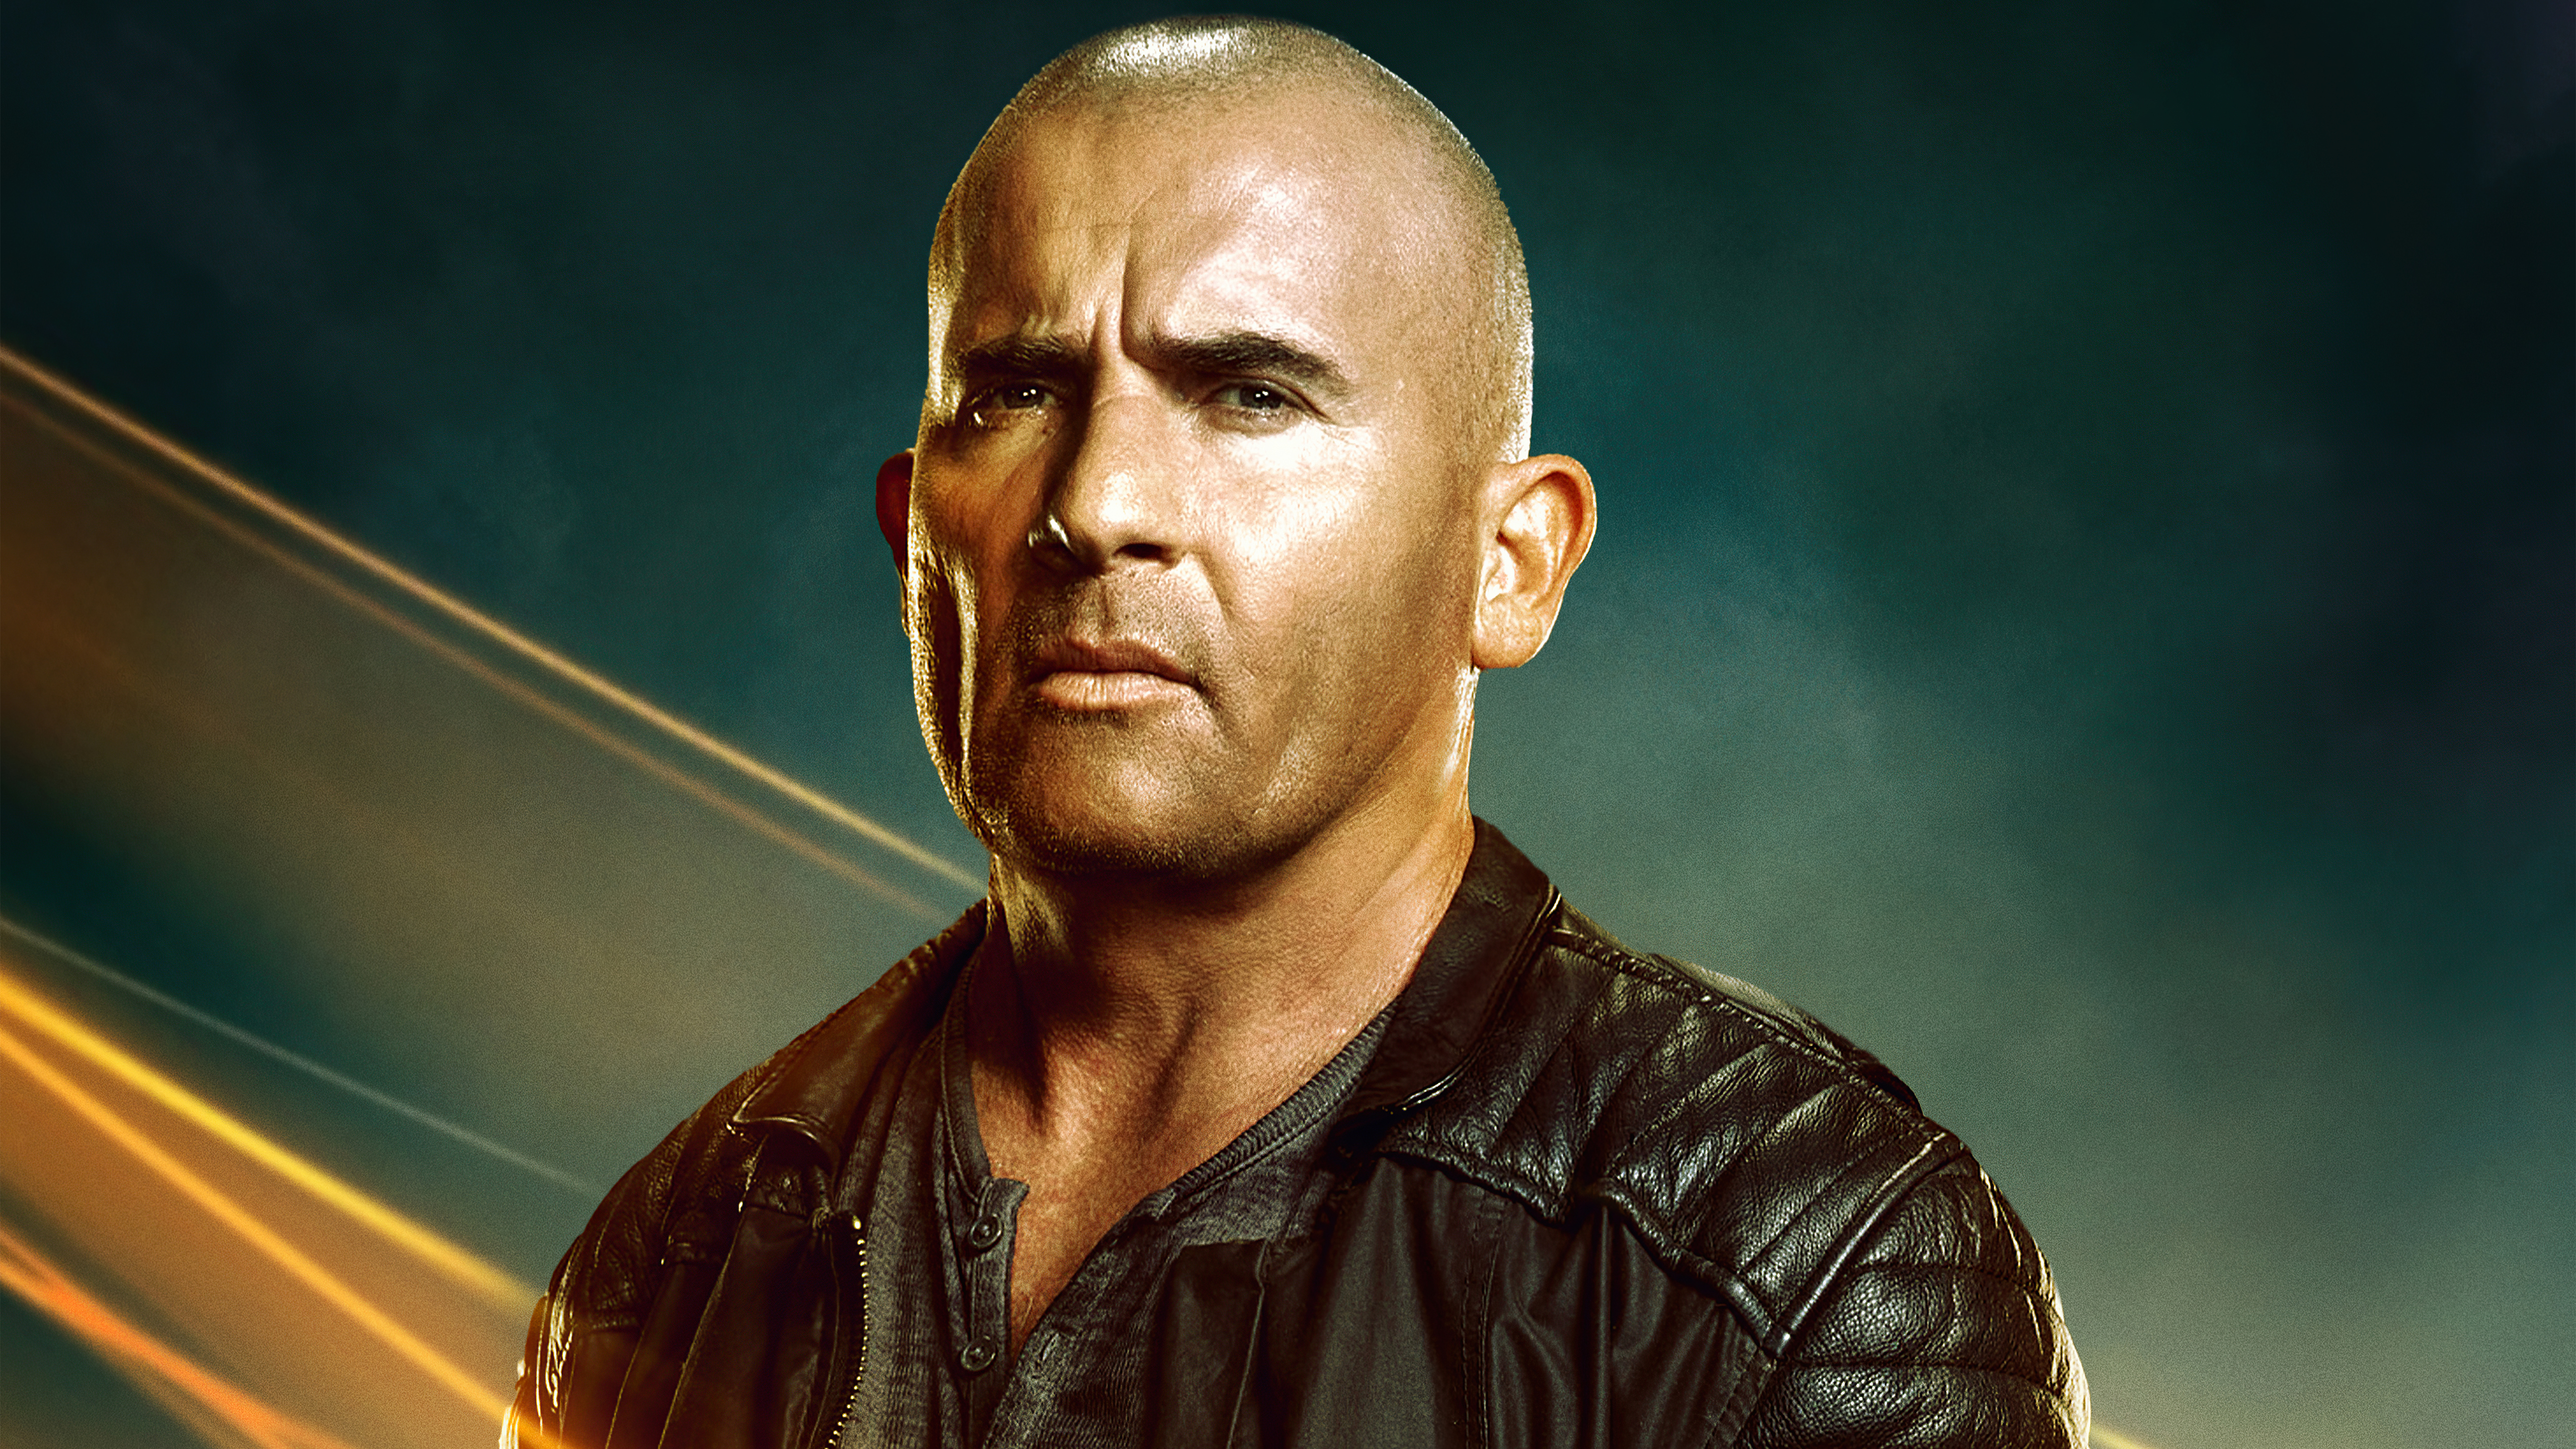 tv show, dc's legends of tomorrow, dominic purcell, heat wave (dc comics)